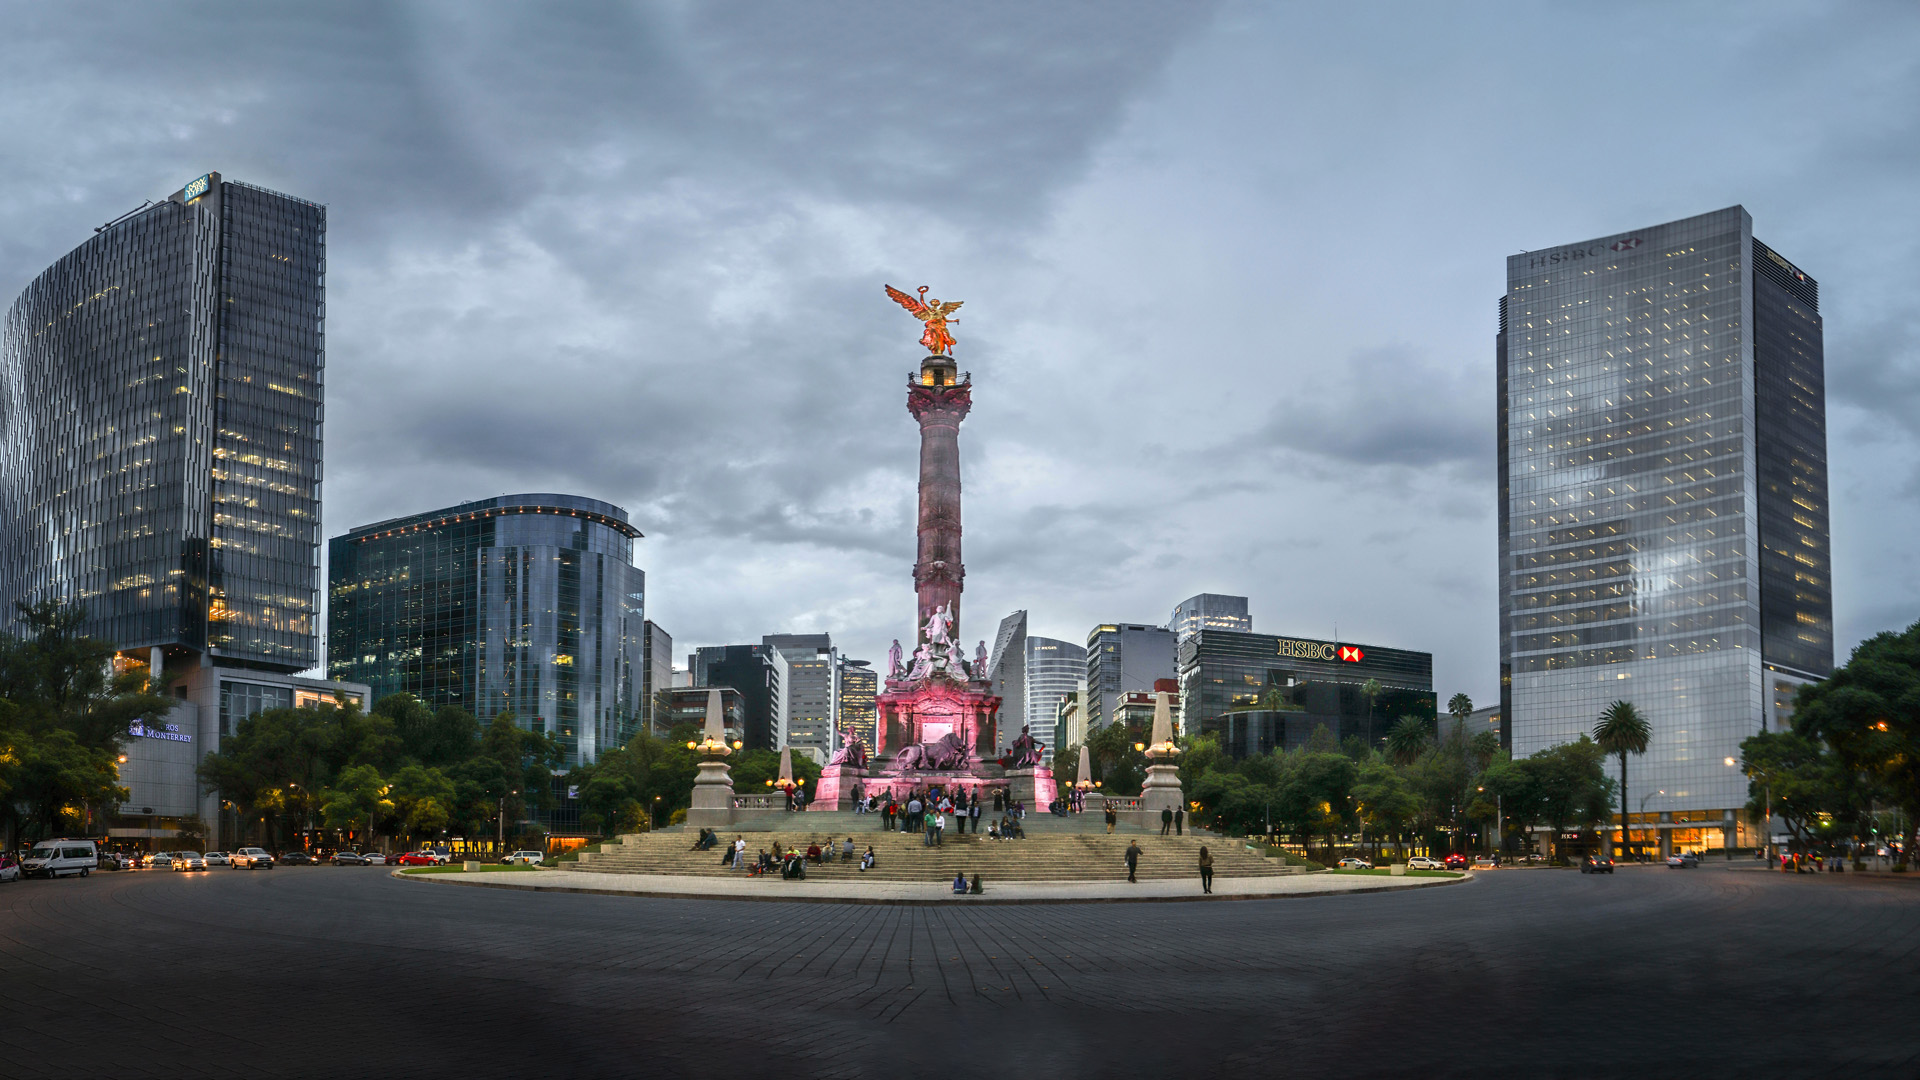 Mexico city monument on a overcast day in the late afternoon